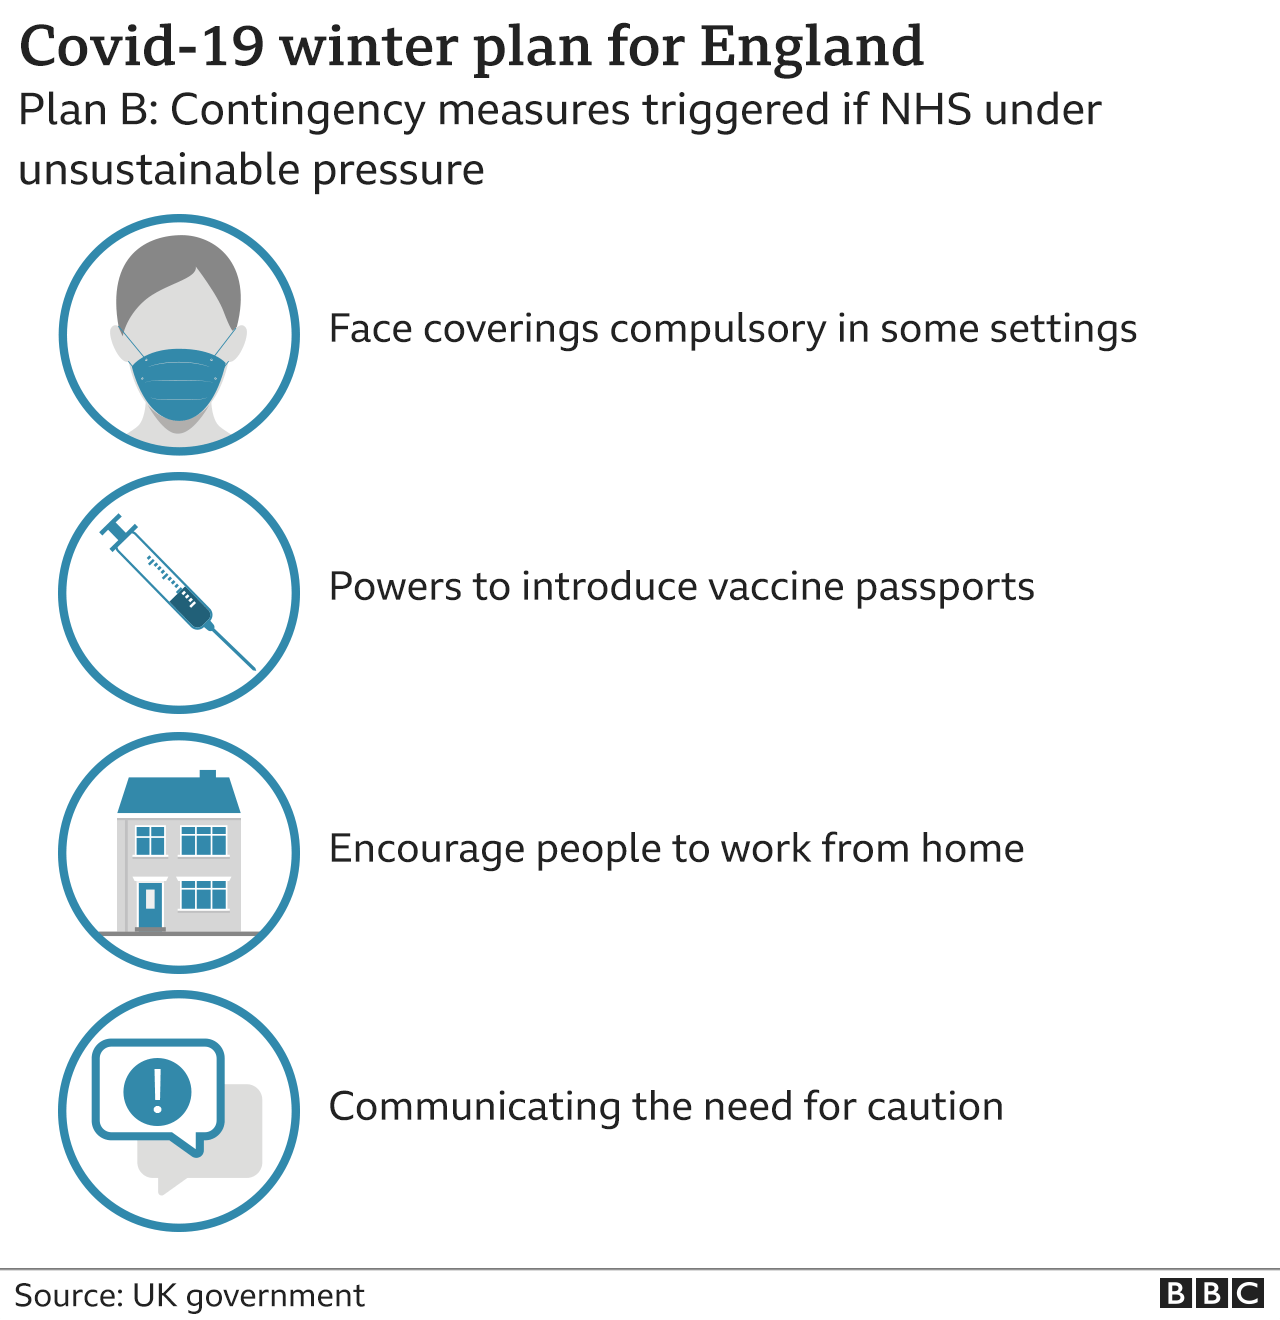 Chart showing the steps to be taken under the government's Covid Plan B for the winter